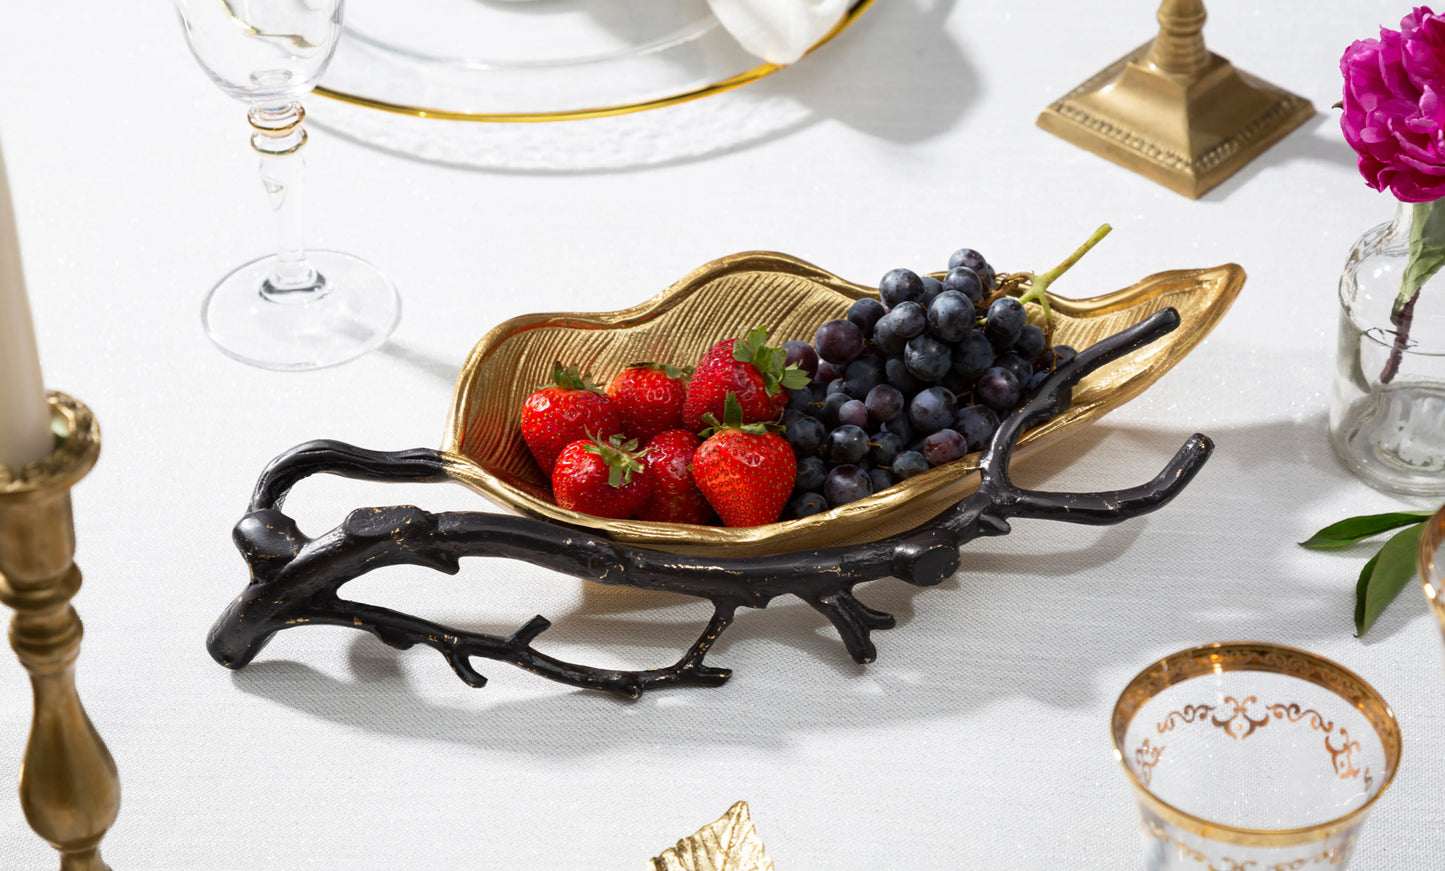 Gold Leaf all Purpose Dish With Black Branch